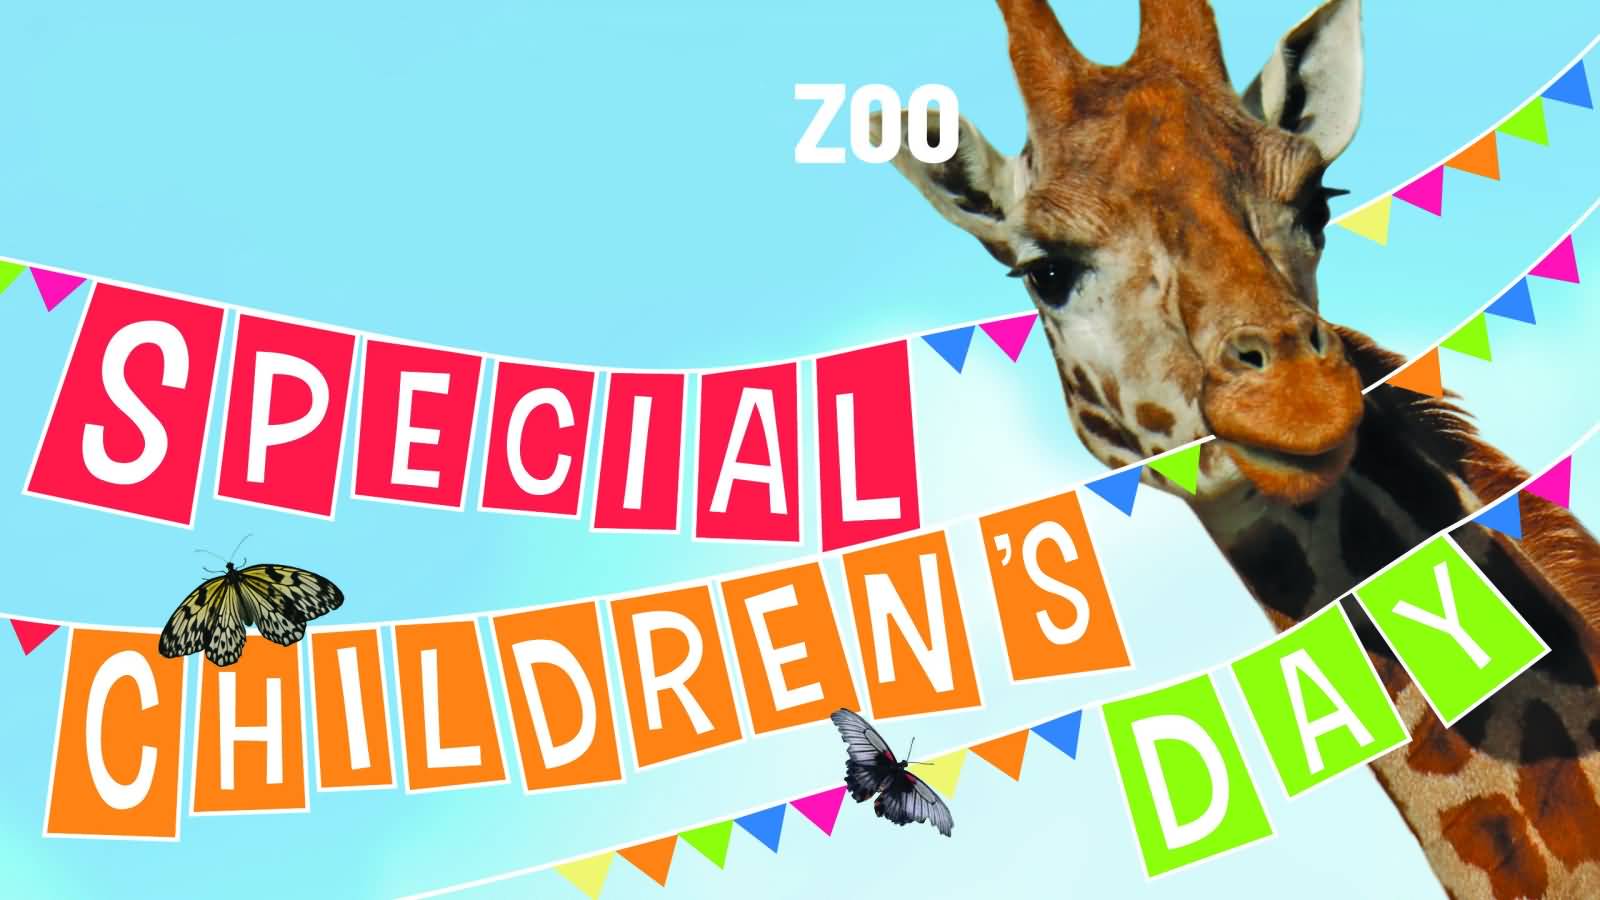 Special Children's Day At Zoo